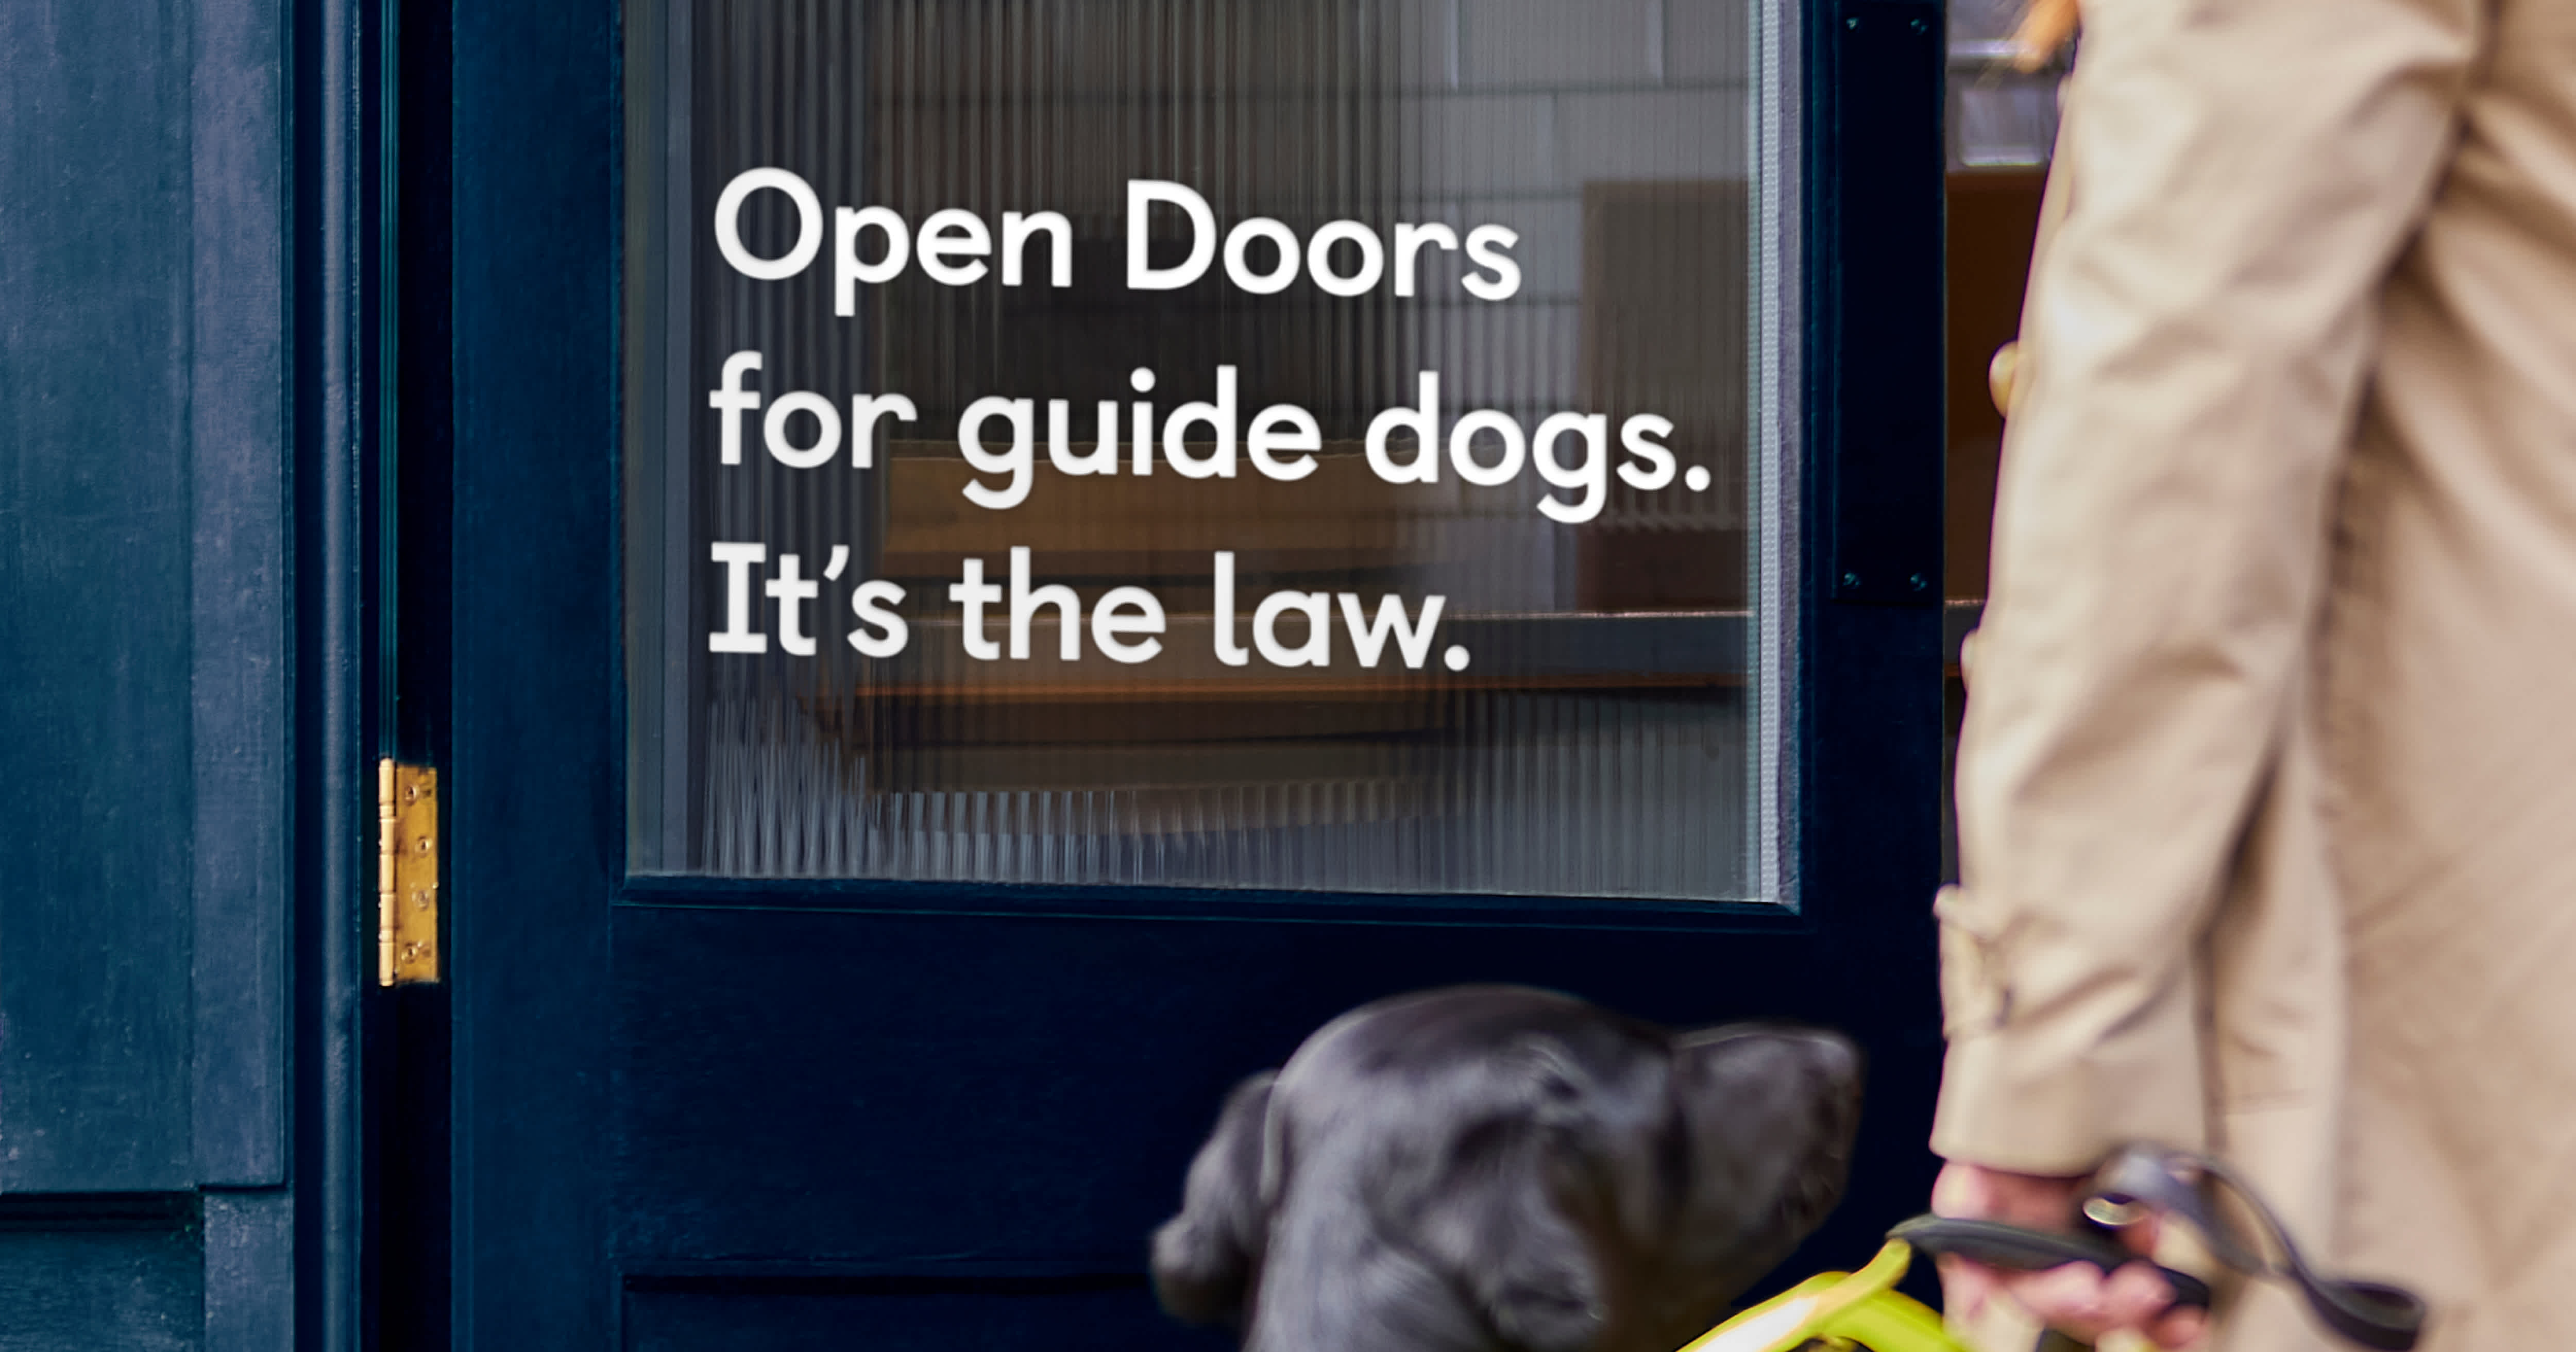 Guide dog owner and guide dog walk towards an open door of a food business.